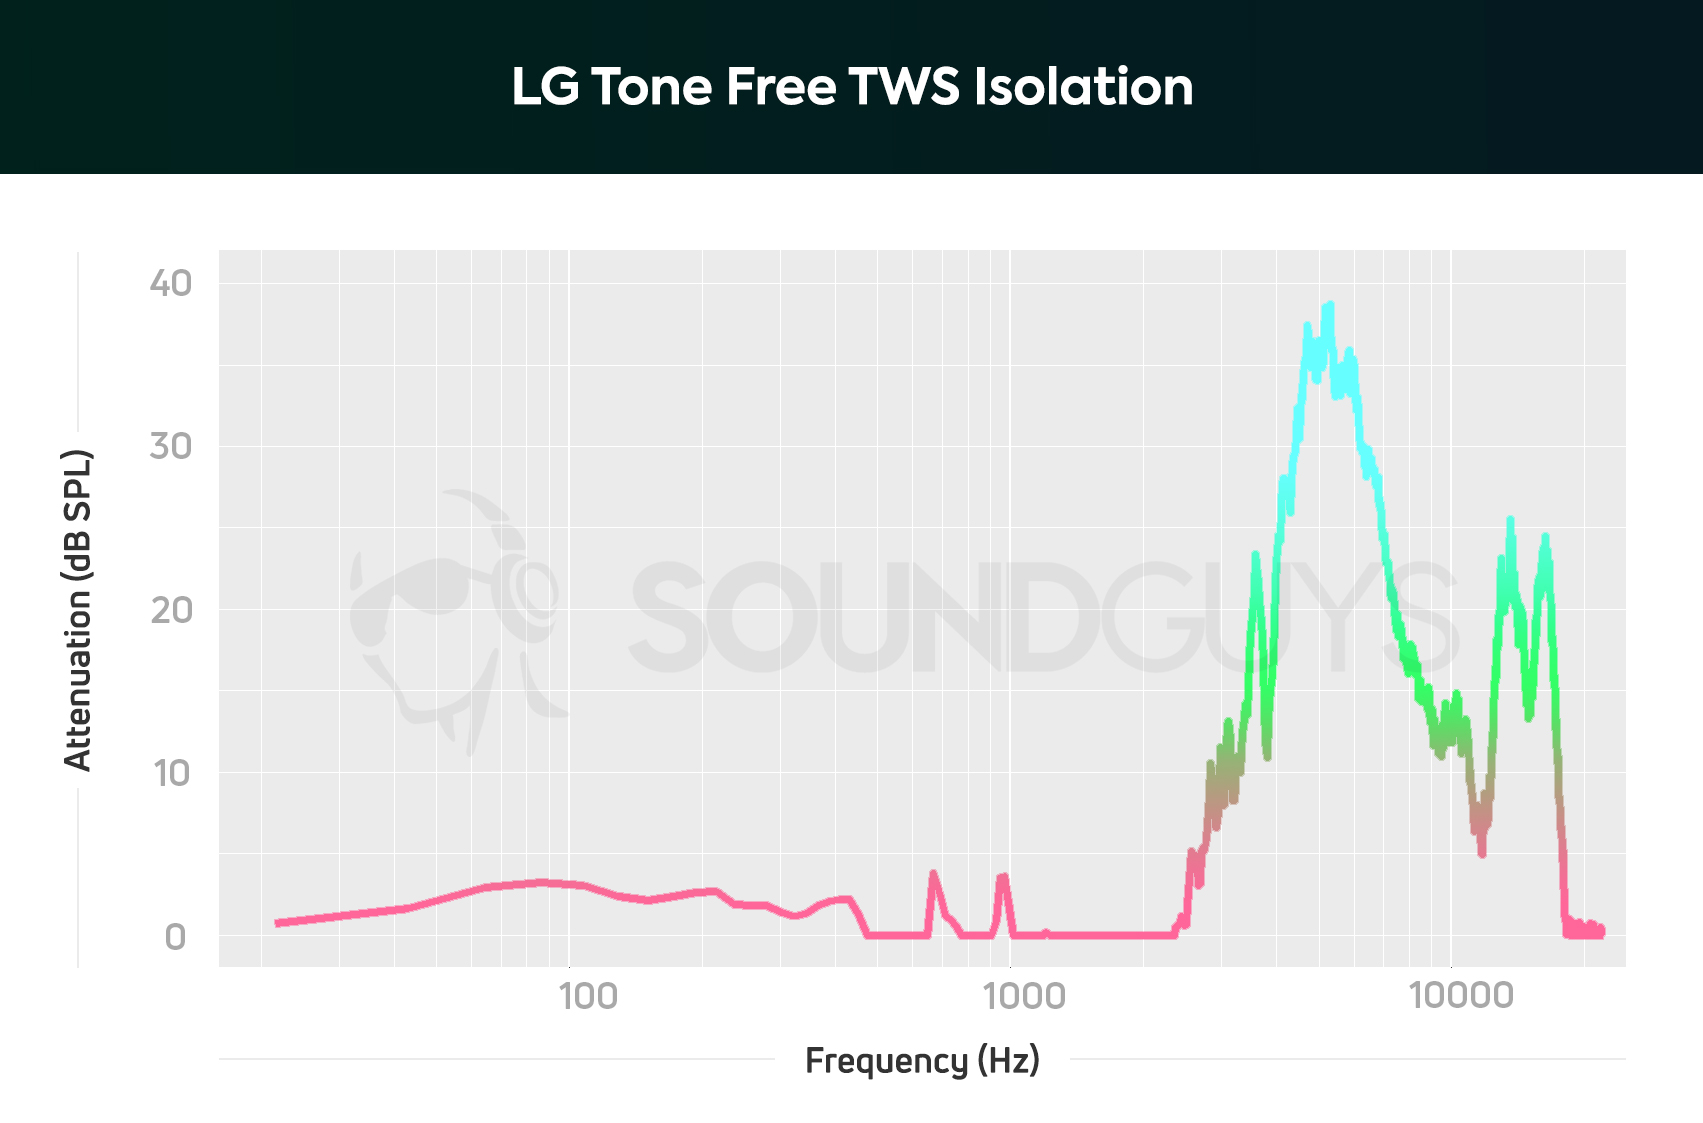 A chart depicting the LG Tone Free HBS FL7 isolation performance.